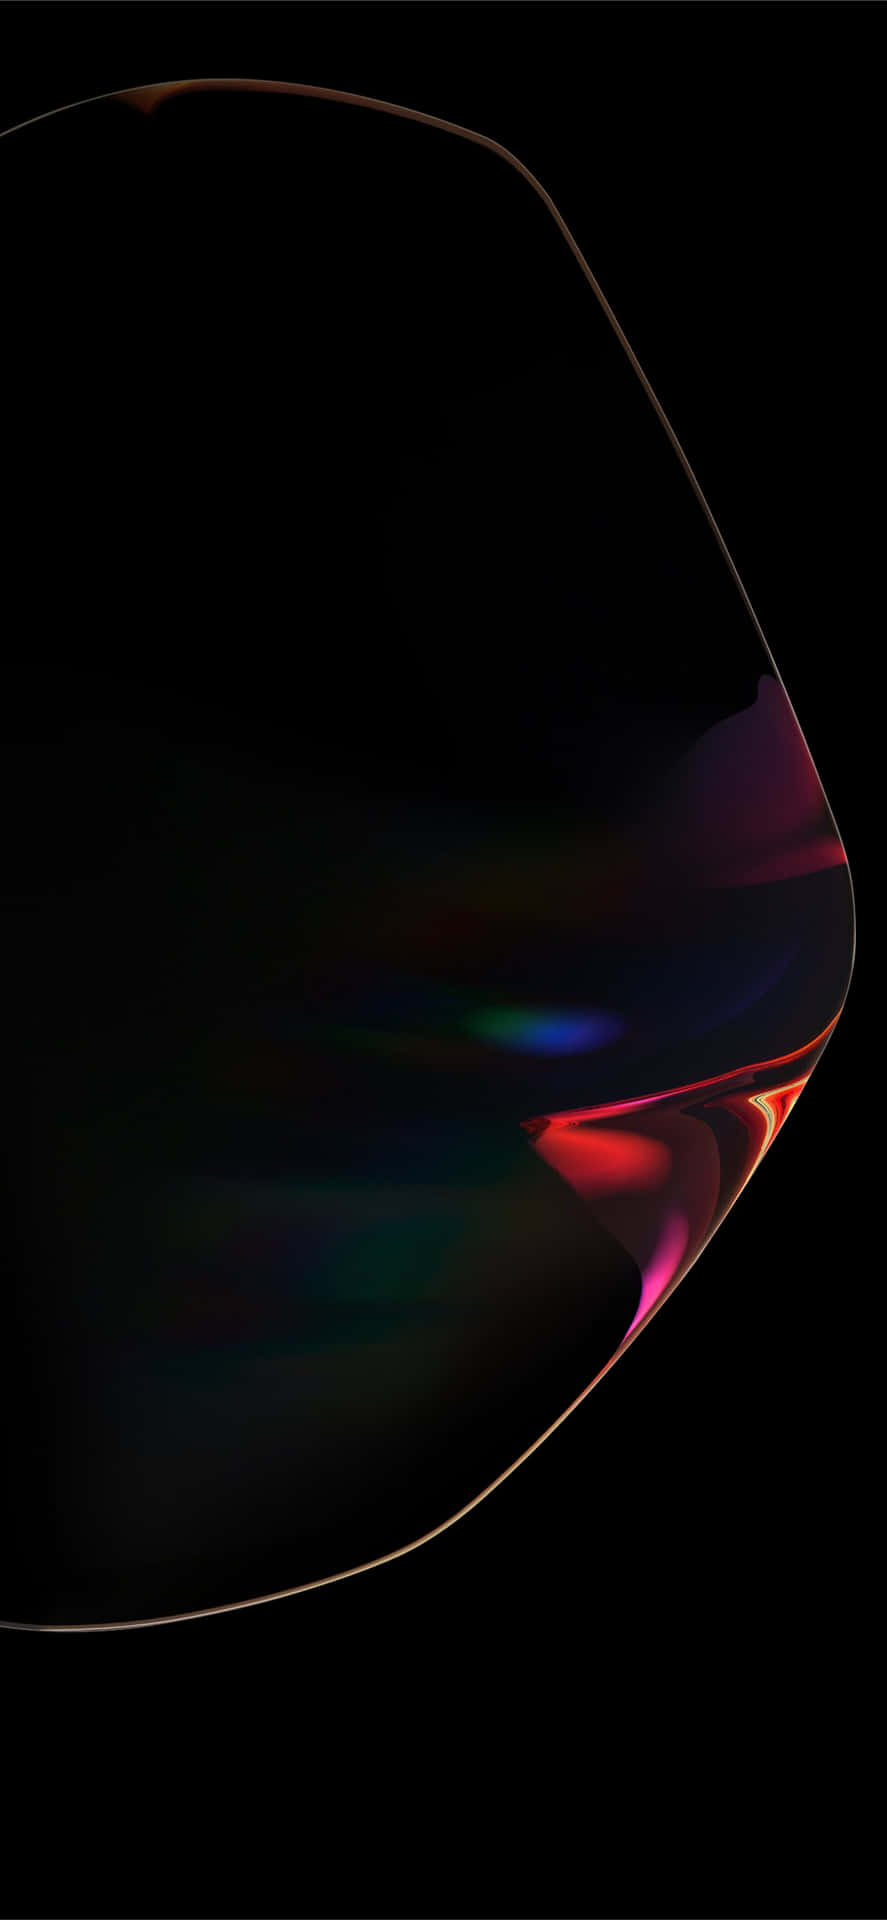 A Close Up Of A Black Object With A Rainbow Colored Light Wallpaper